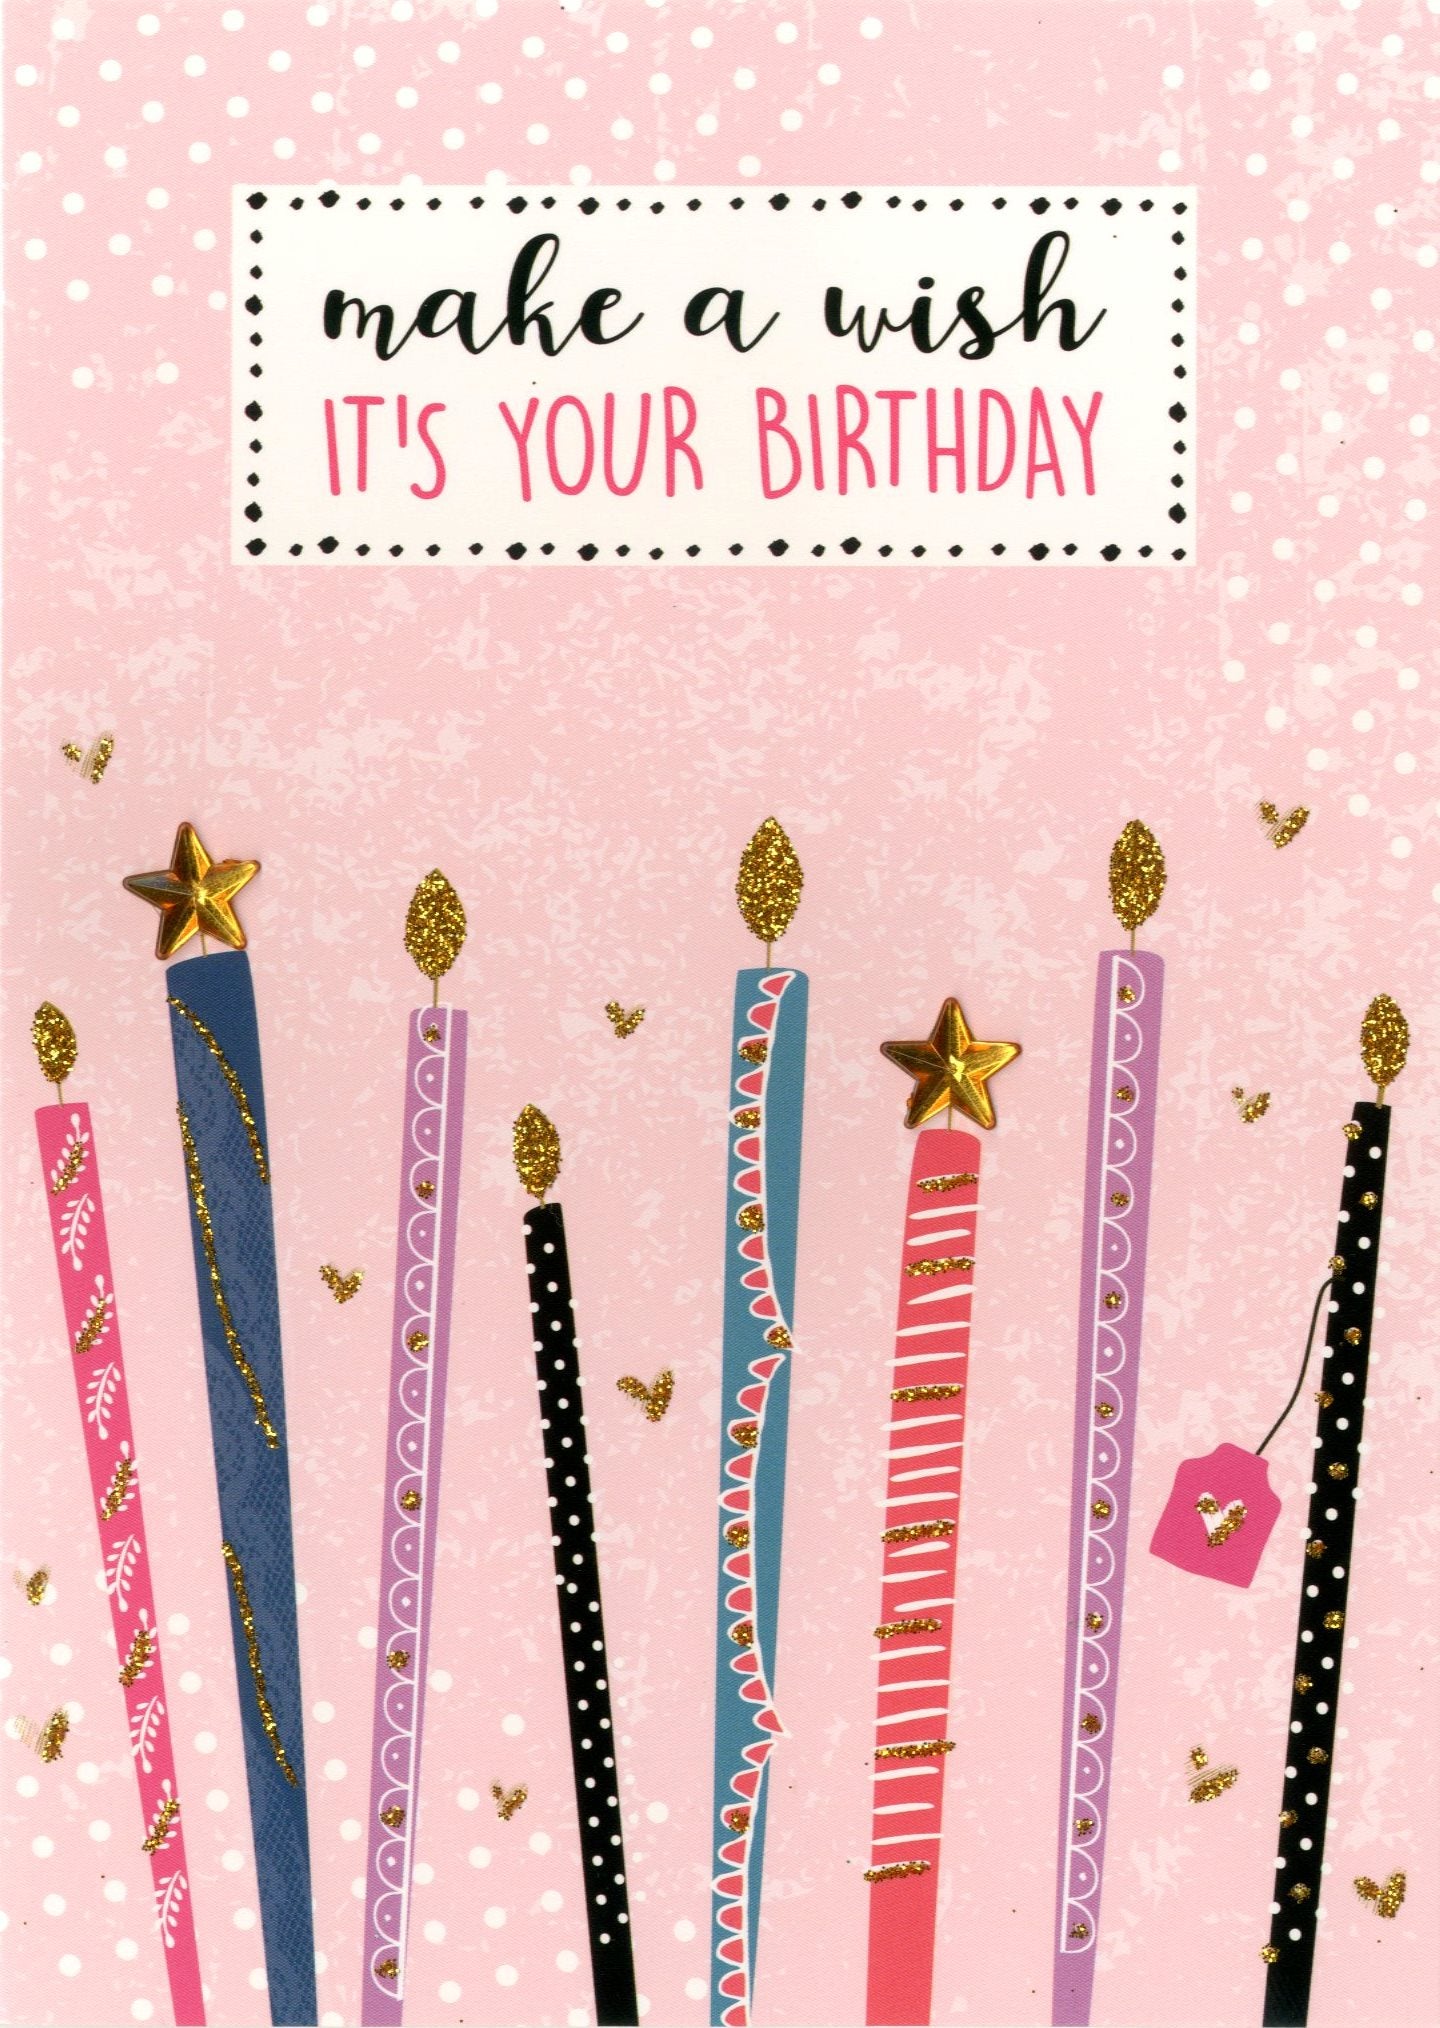 Make A Wish It's Your Birthday Greeting Card